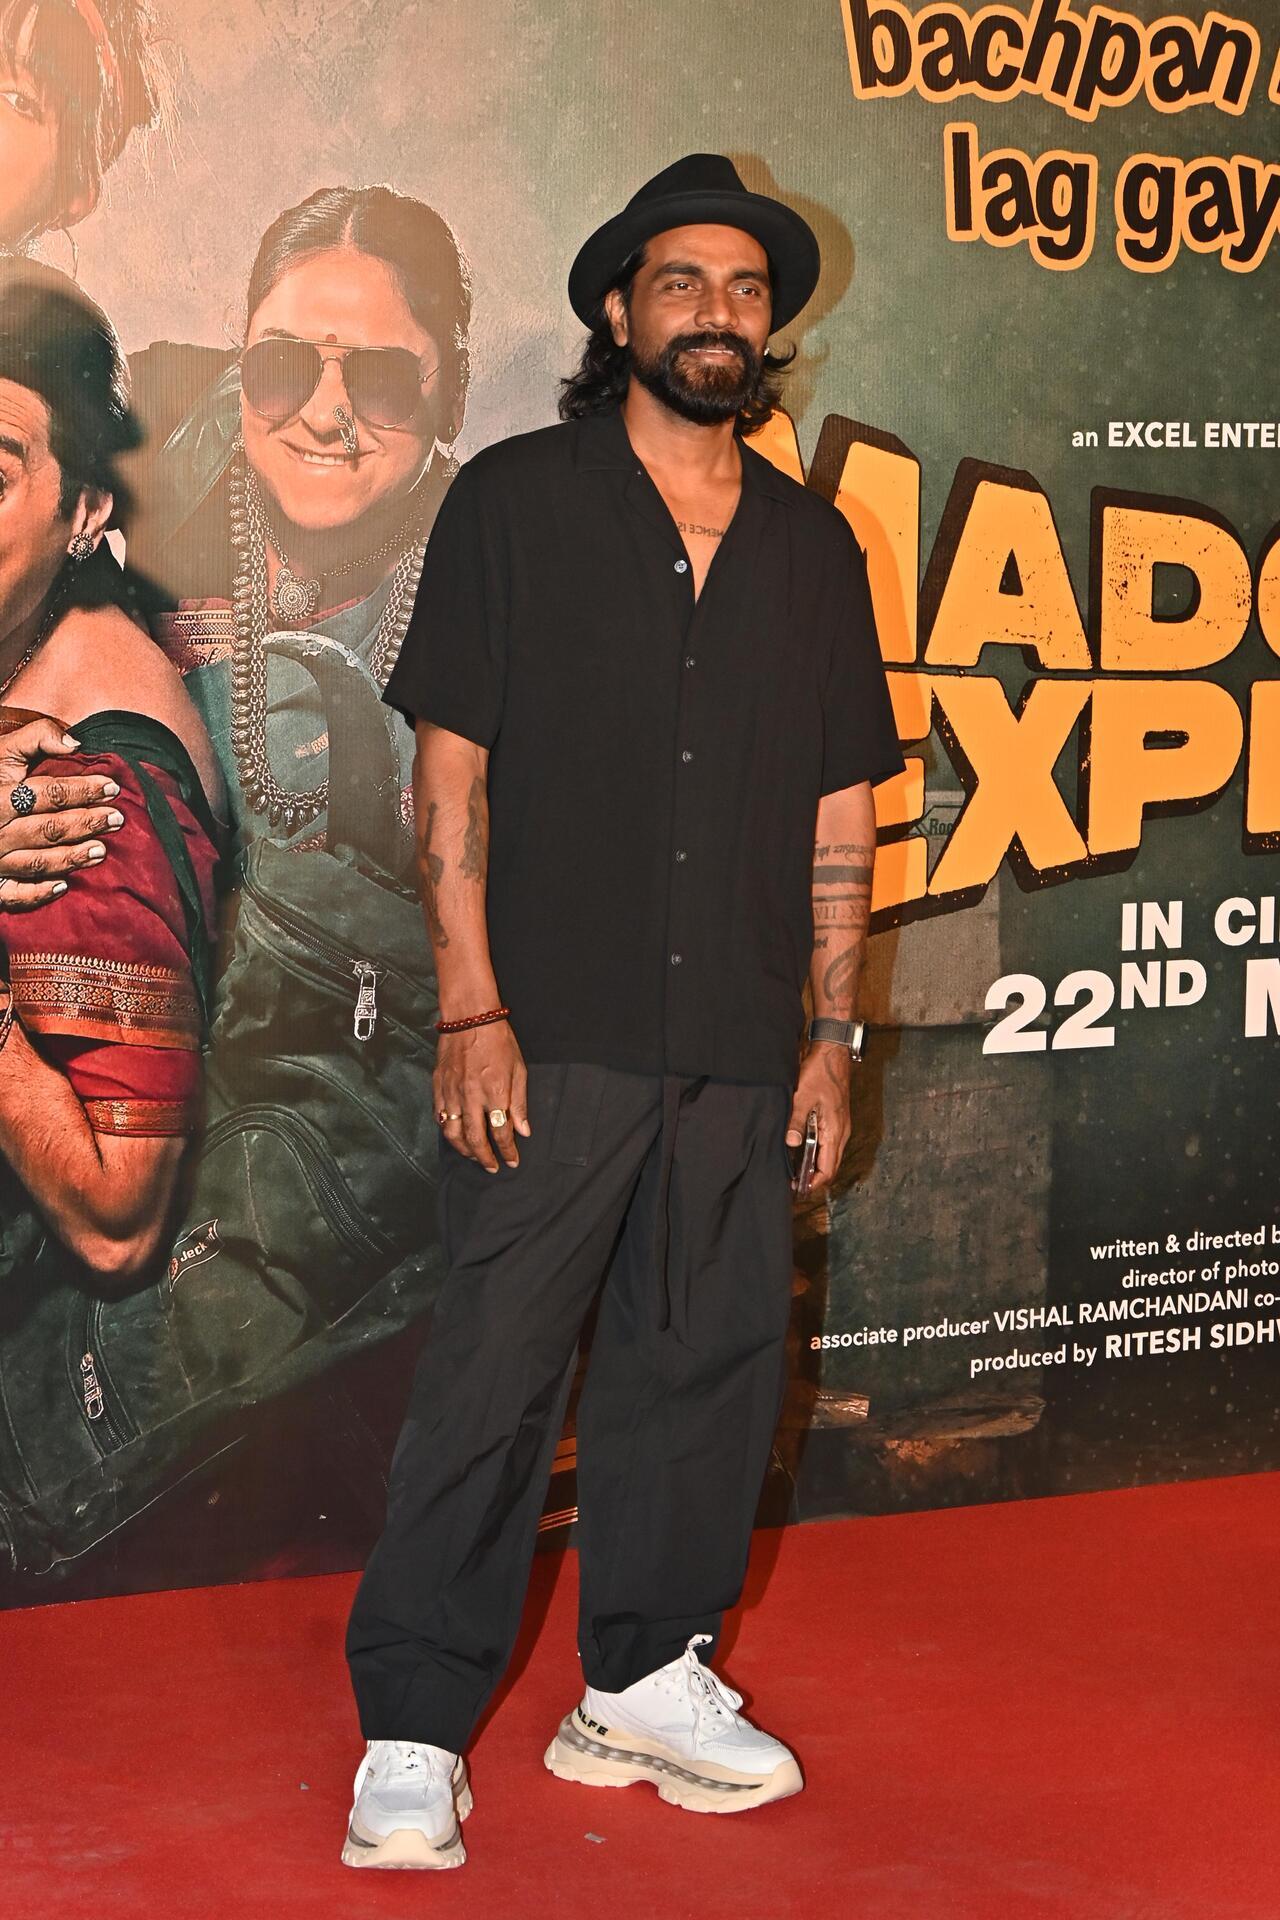 Remo Dsouza, who has a significant role in the film, was also present at the event